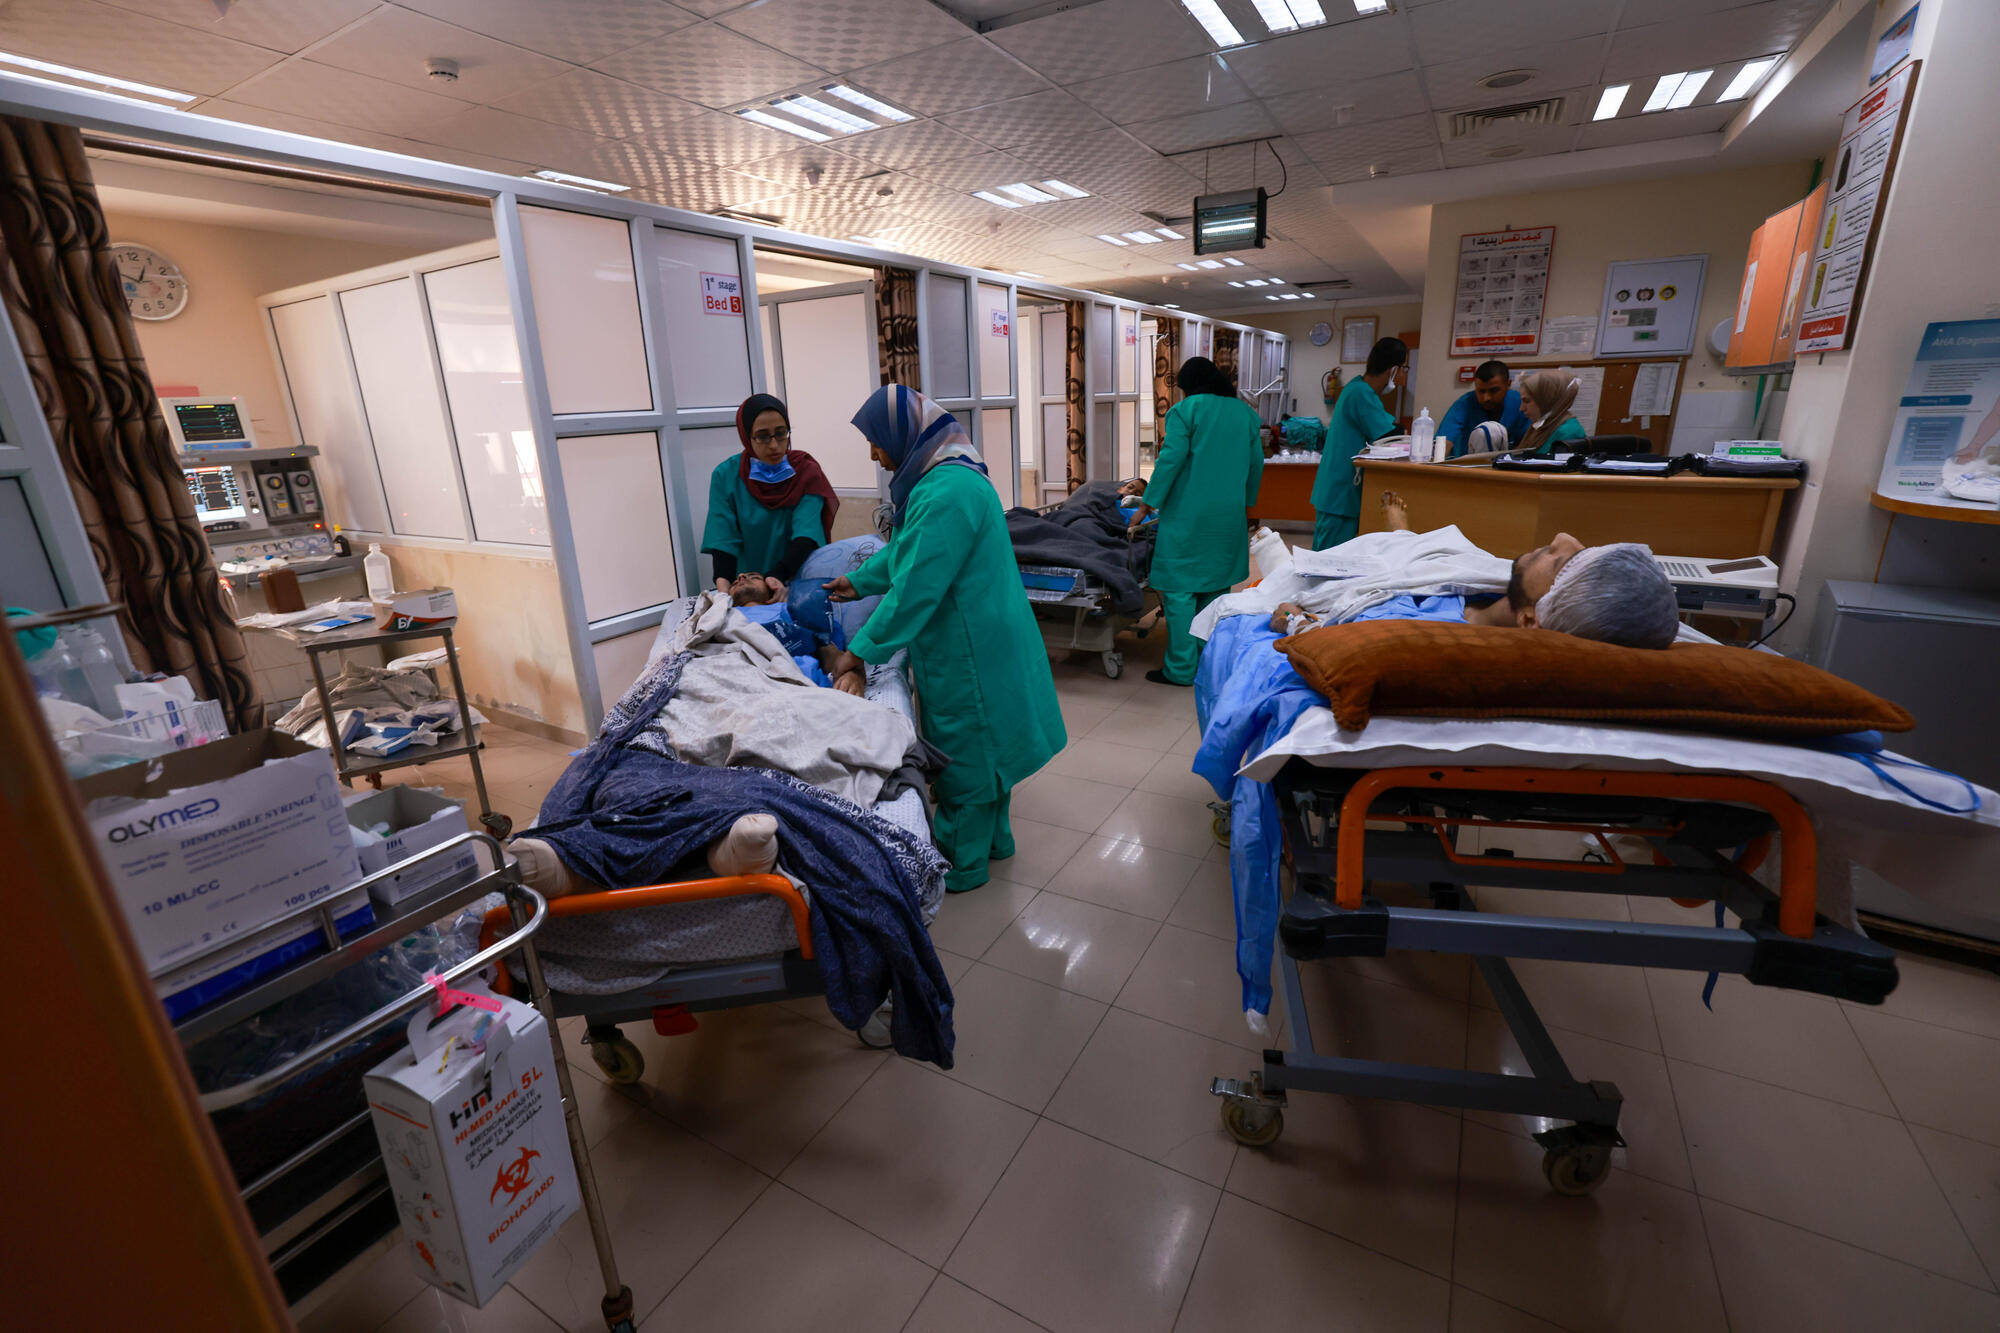 Healthcare workers in Gaza struggle with the psychological toll of enduring conflict